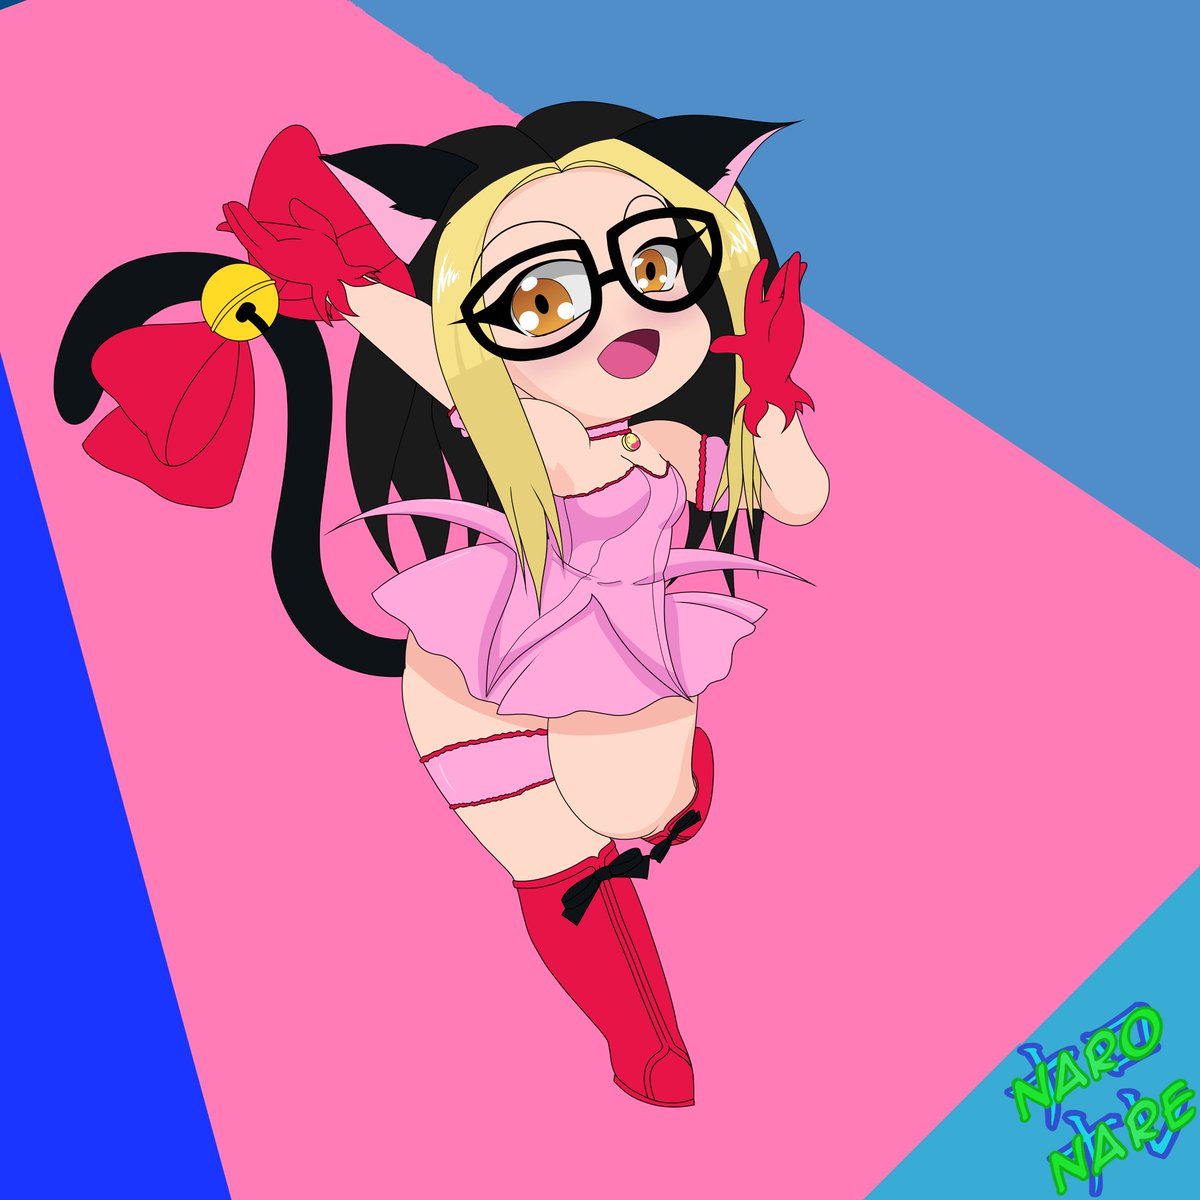 Hyper late birthday pressent for one of my bestest friends wich isnt on twitter so i can't tag her u.u

#glasses #persona #chibi #persona #blush #cosplay #sailormoon #tokyomewmew #CardCaptorSakura #multicoloredhair #happy #smile #cute